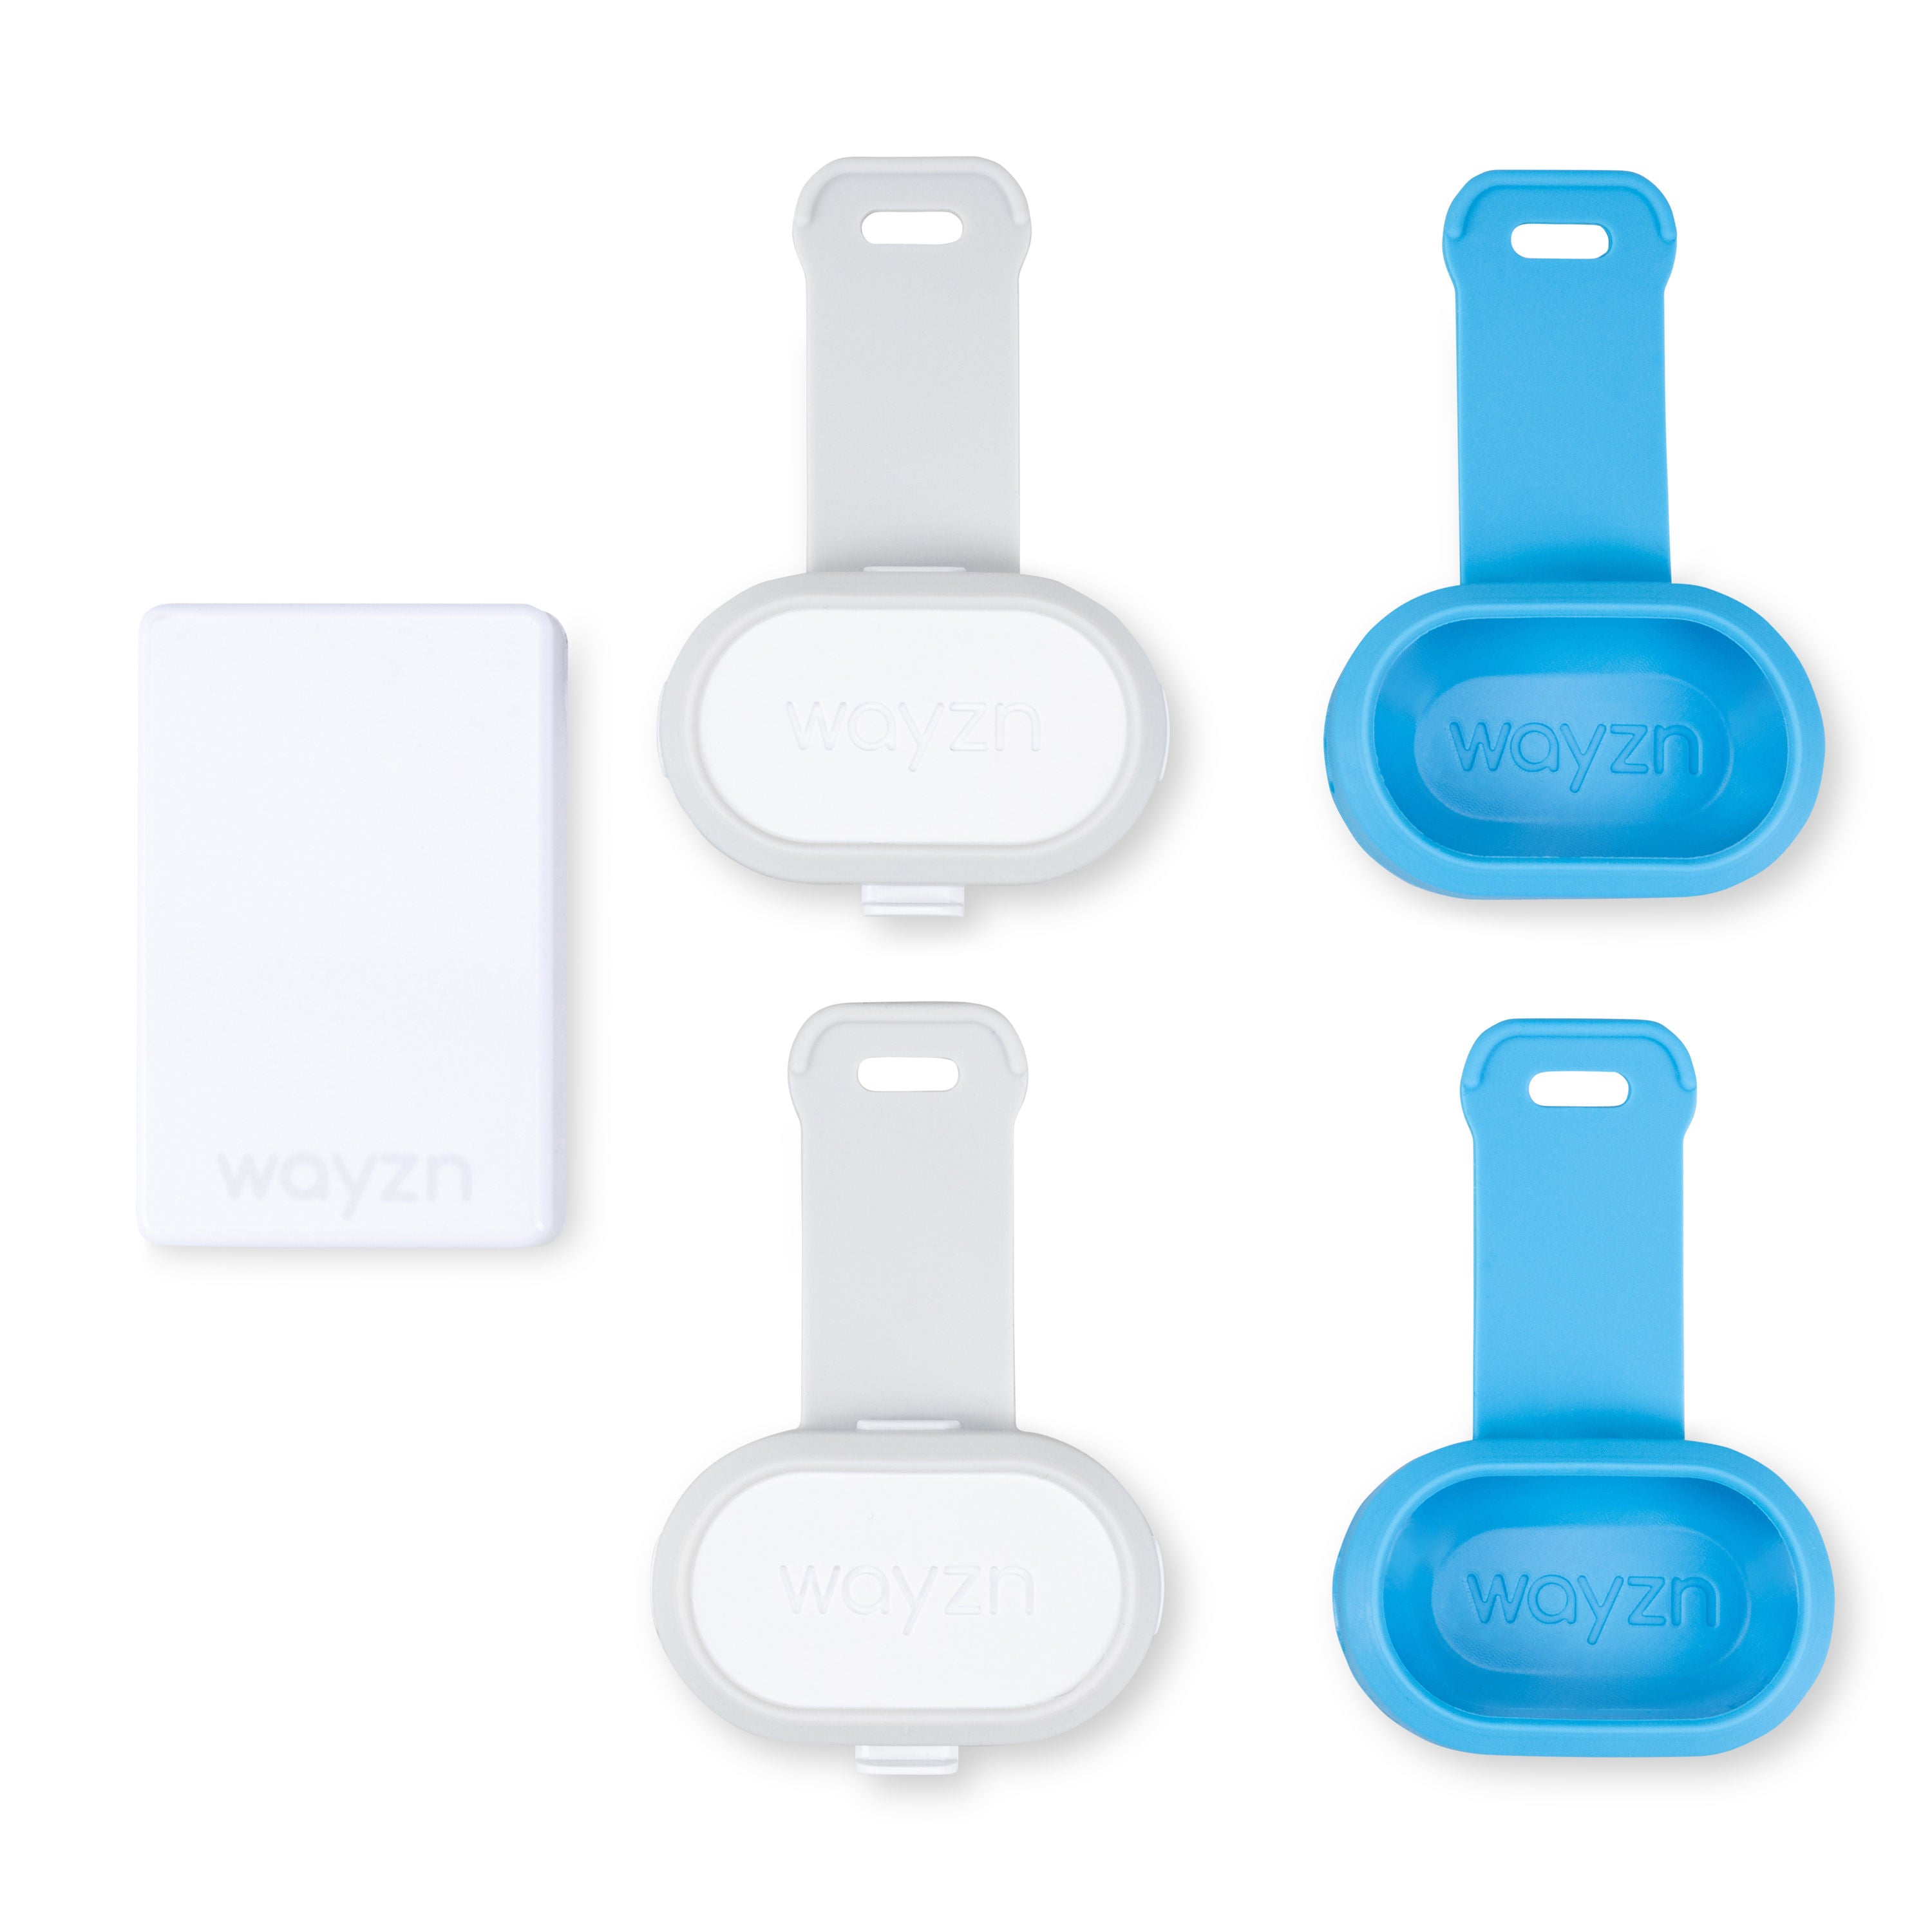 Wayzn Pet Tag comes with extra straps